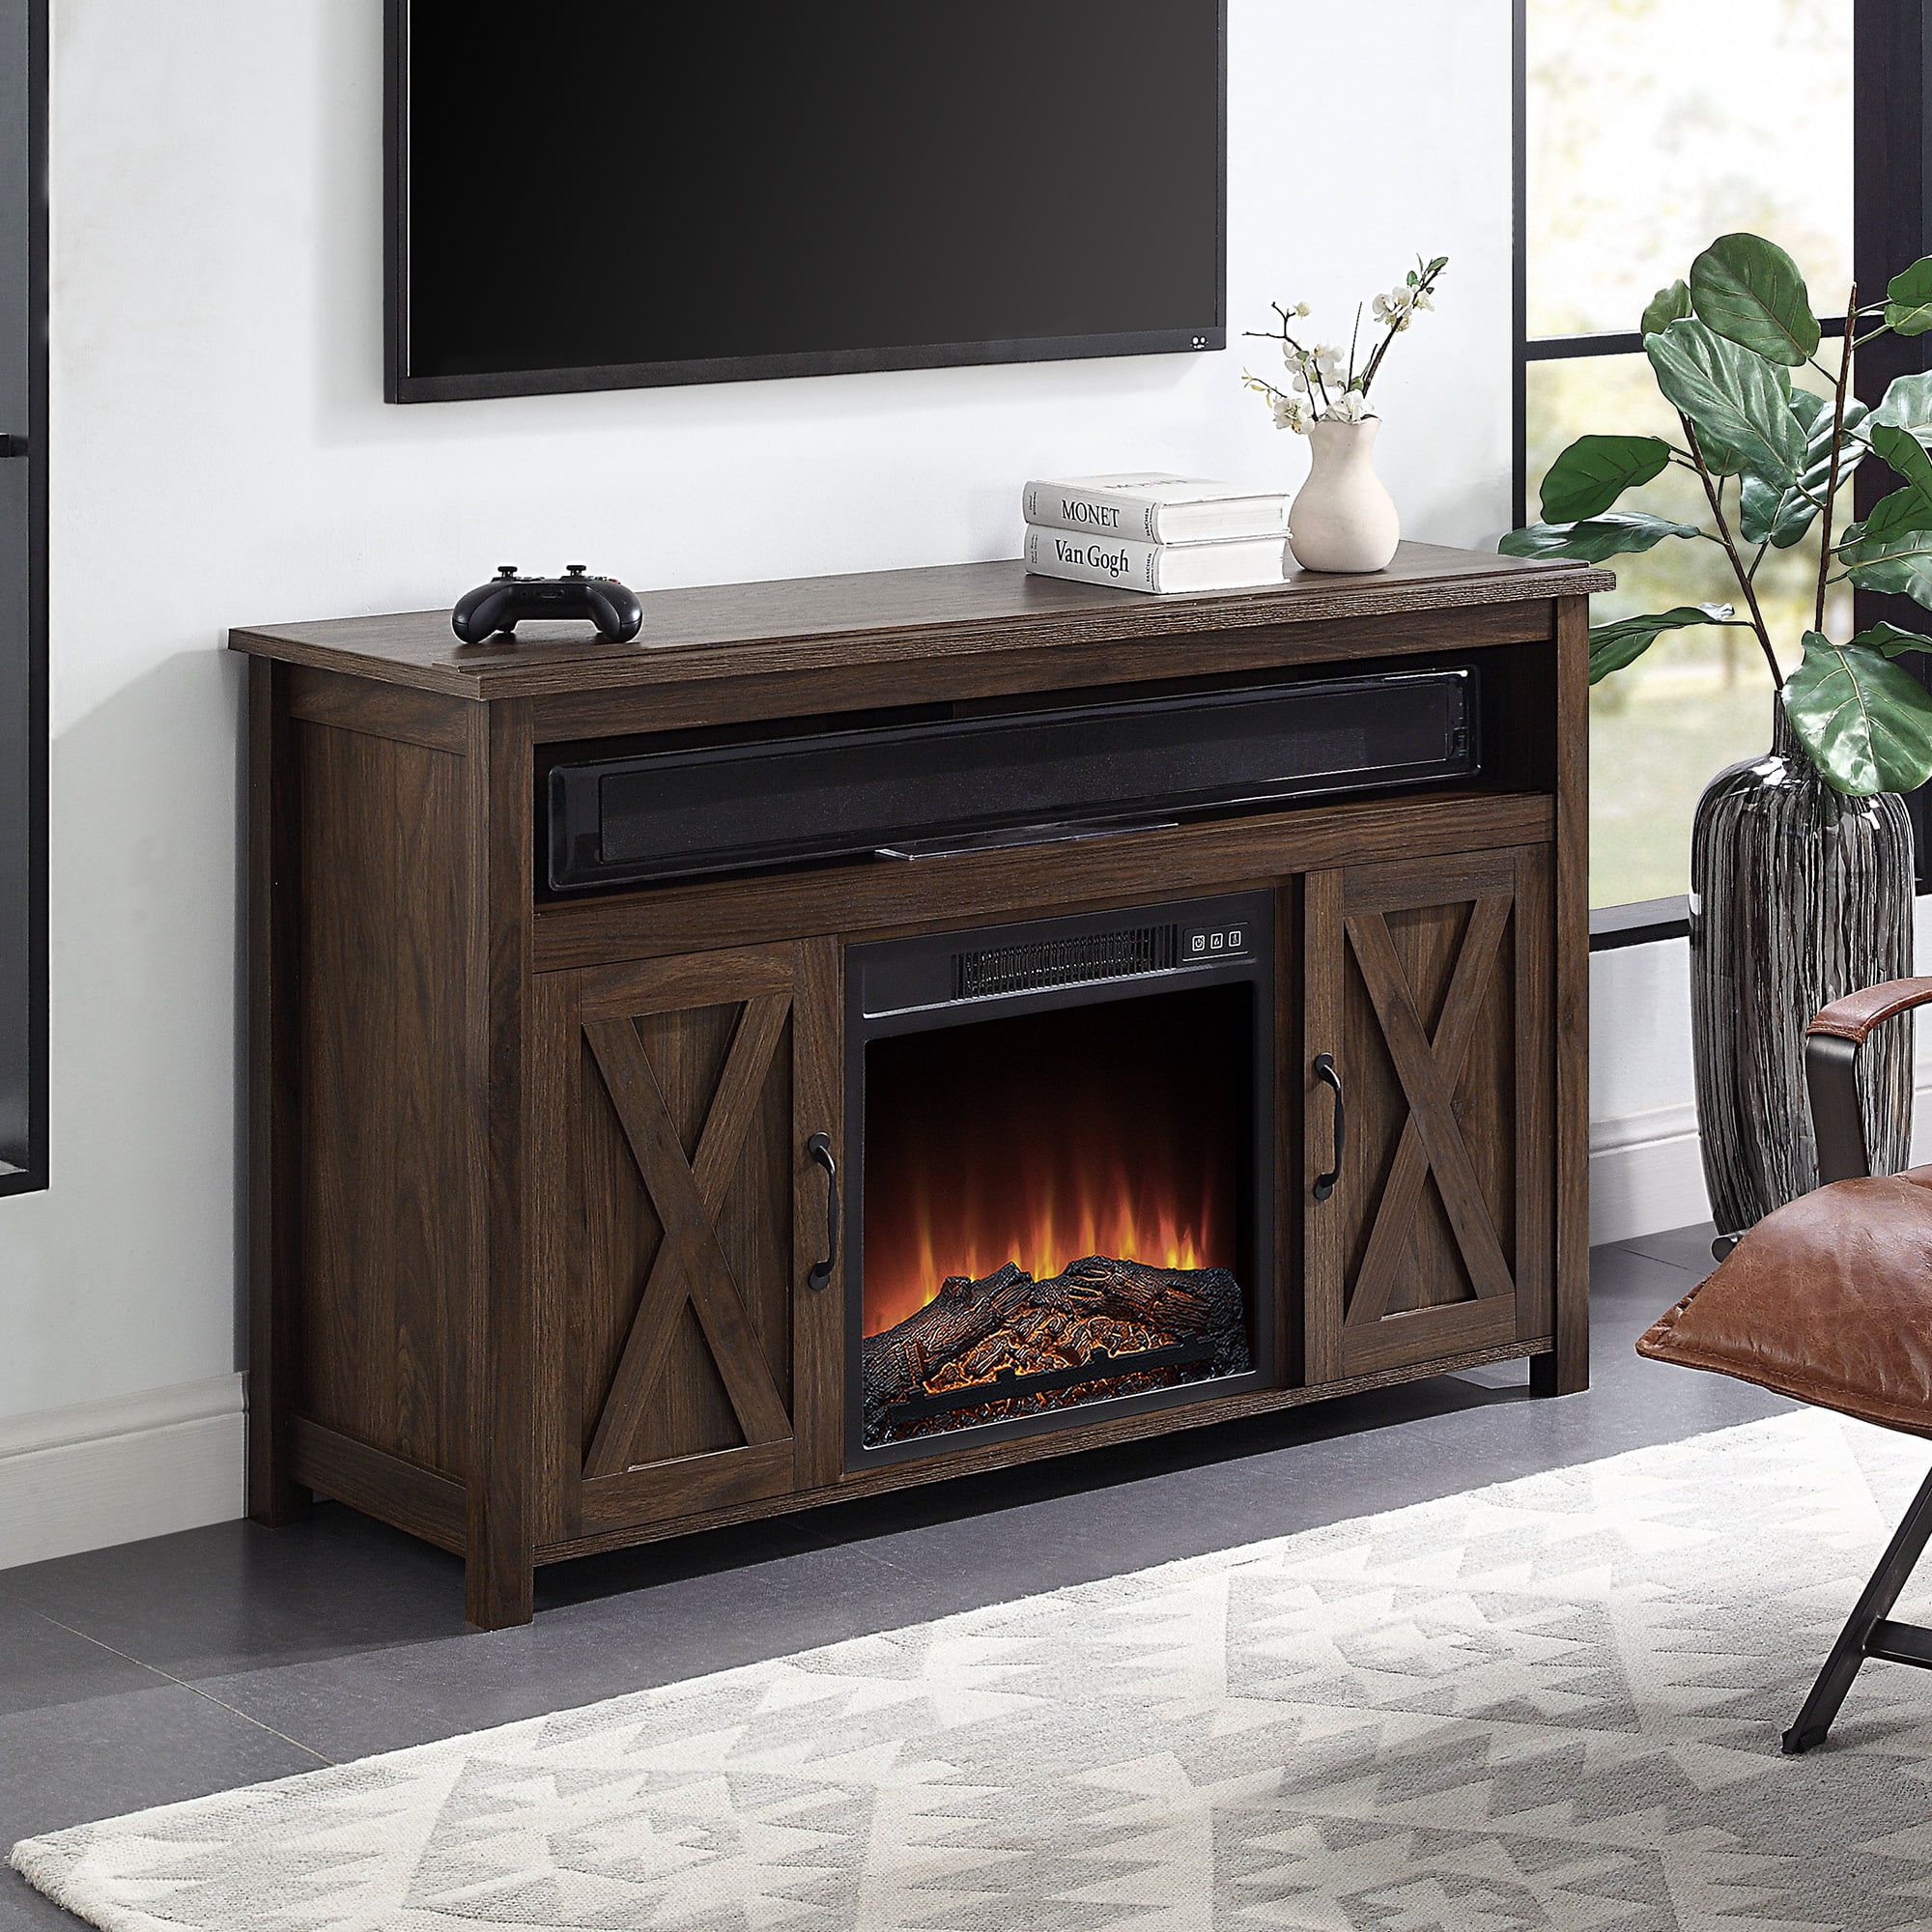 Belleze Tv Stand Console Electric Fireplace With Remote Control, 48" Or Intended For Tv Stands With Electric Fireplace (Gallery 9 of 20)